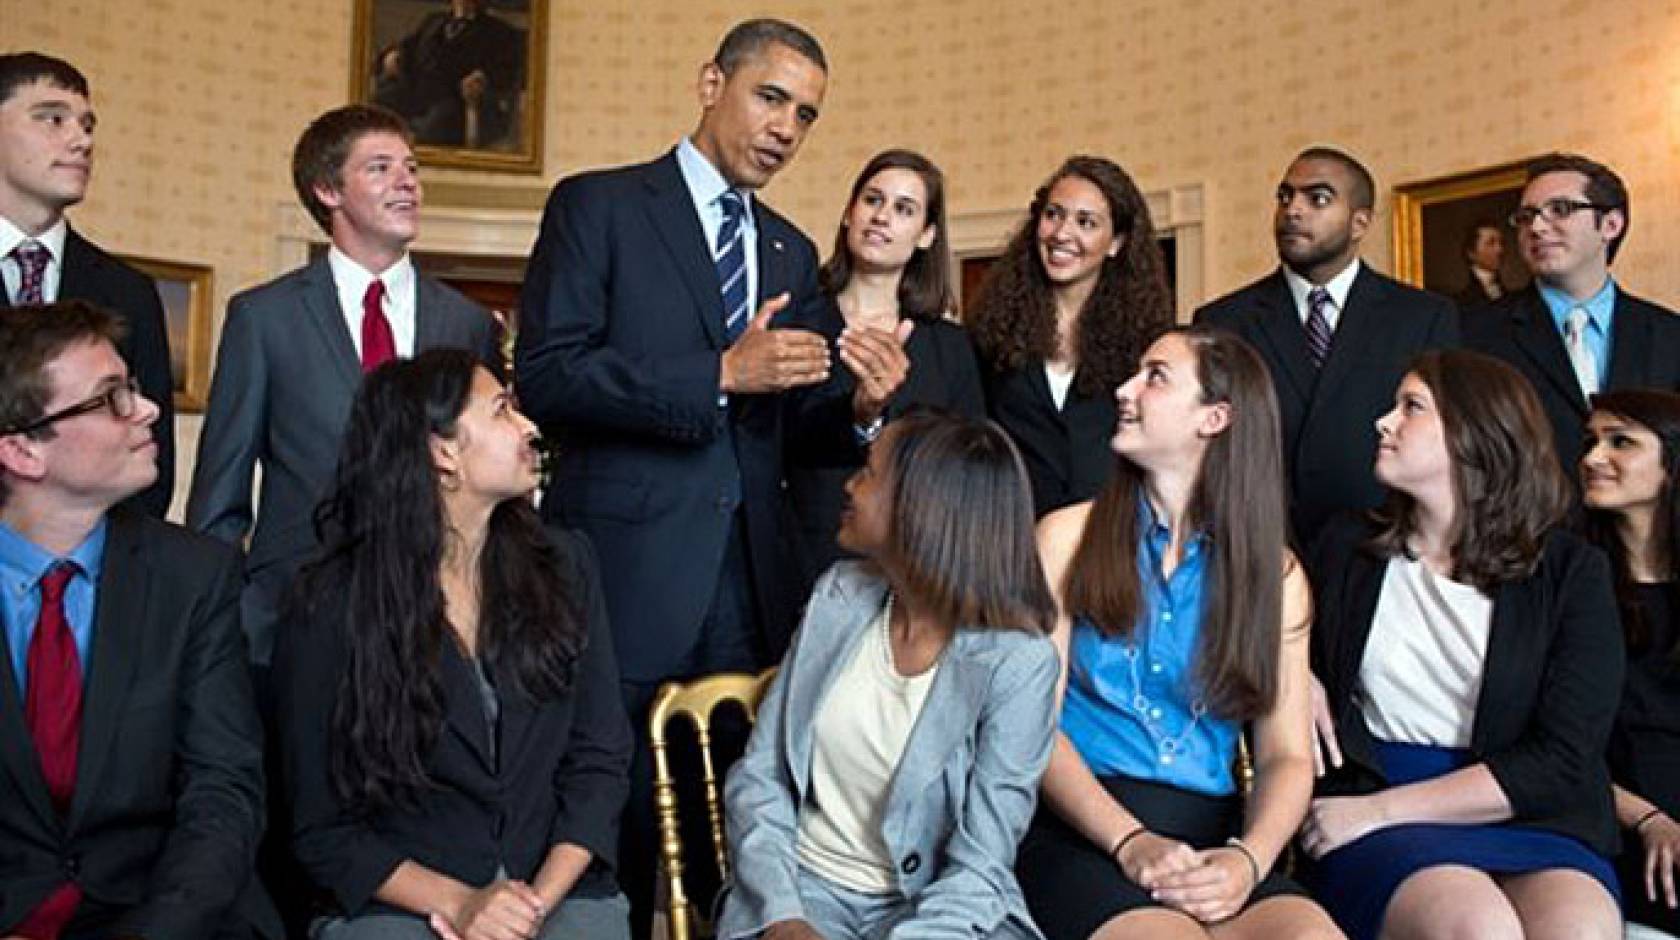 President Obama and students